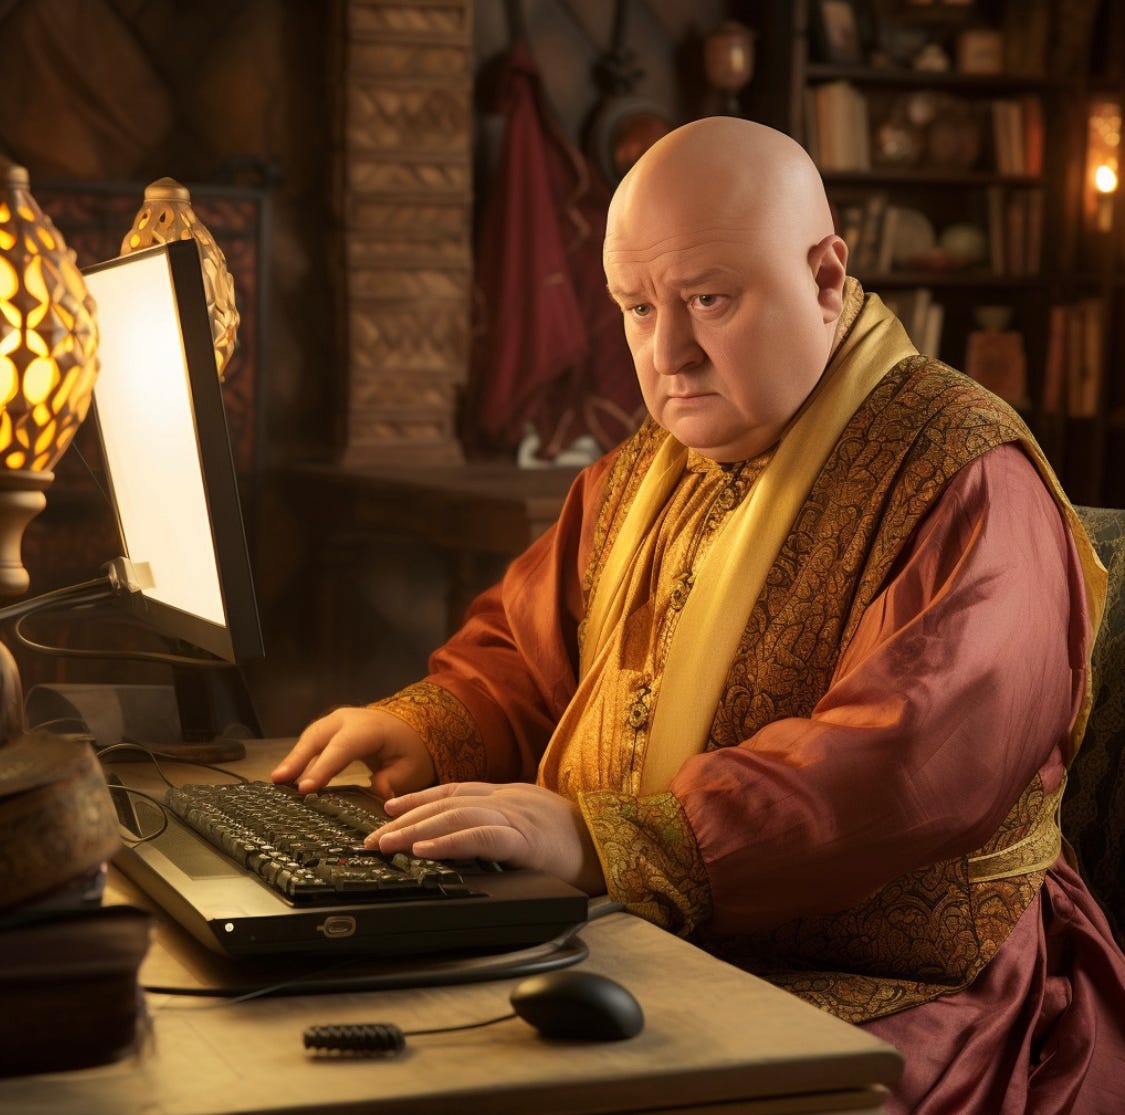 The eunuch spymaster Lord Varys, from the TV adaptation of Game of Thrones, sits in front of a desktop computer... plotting something?